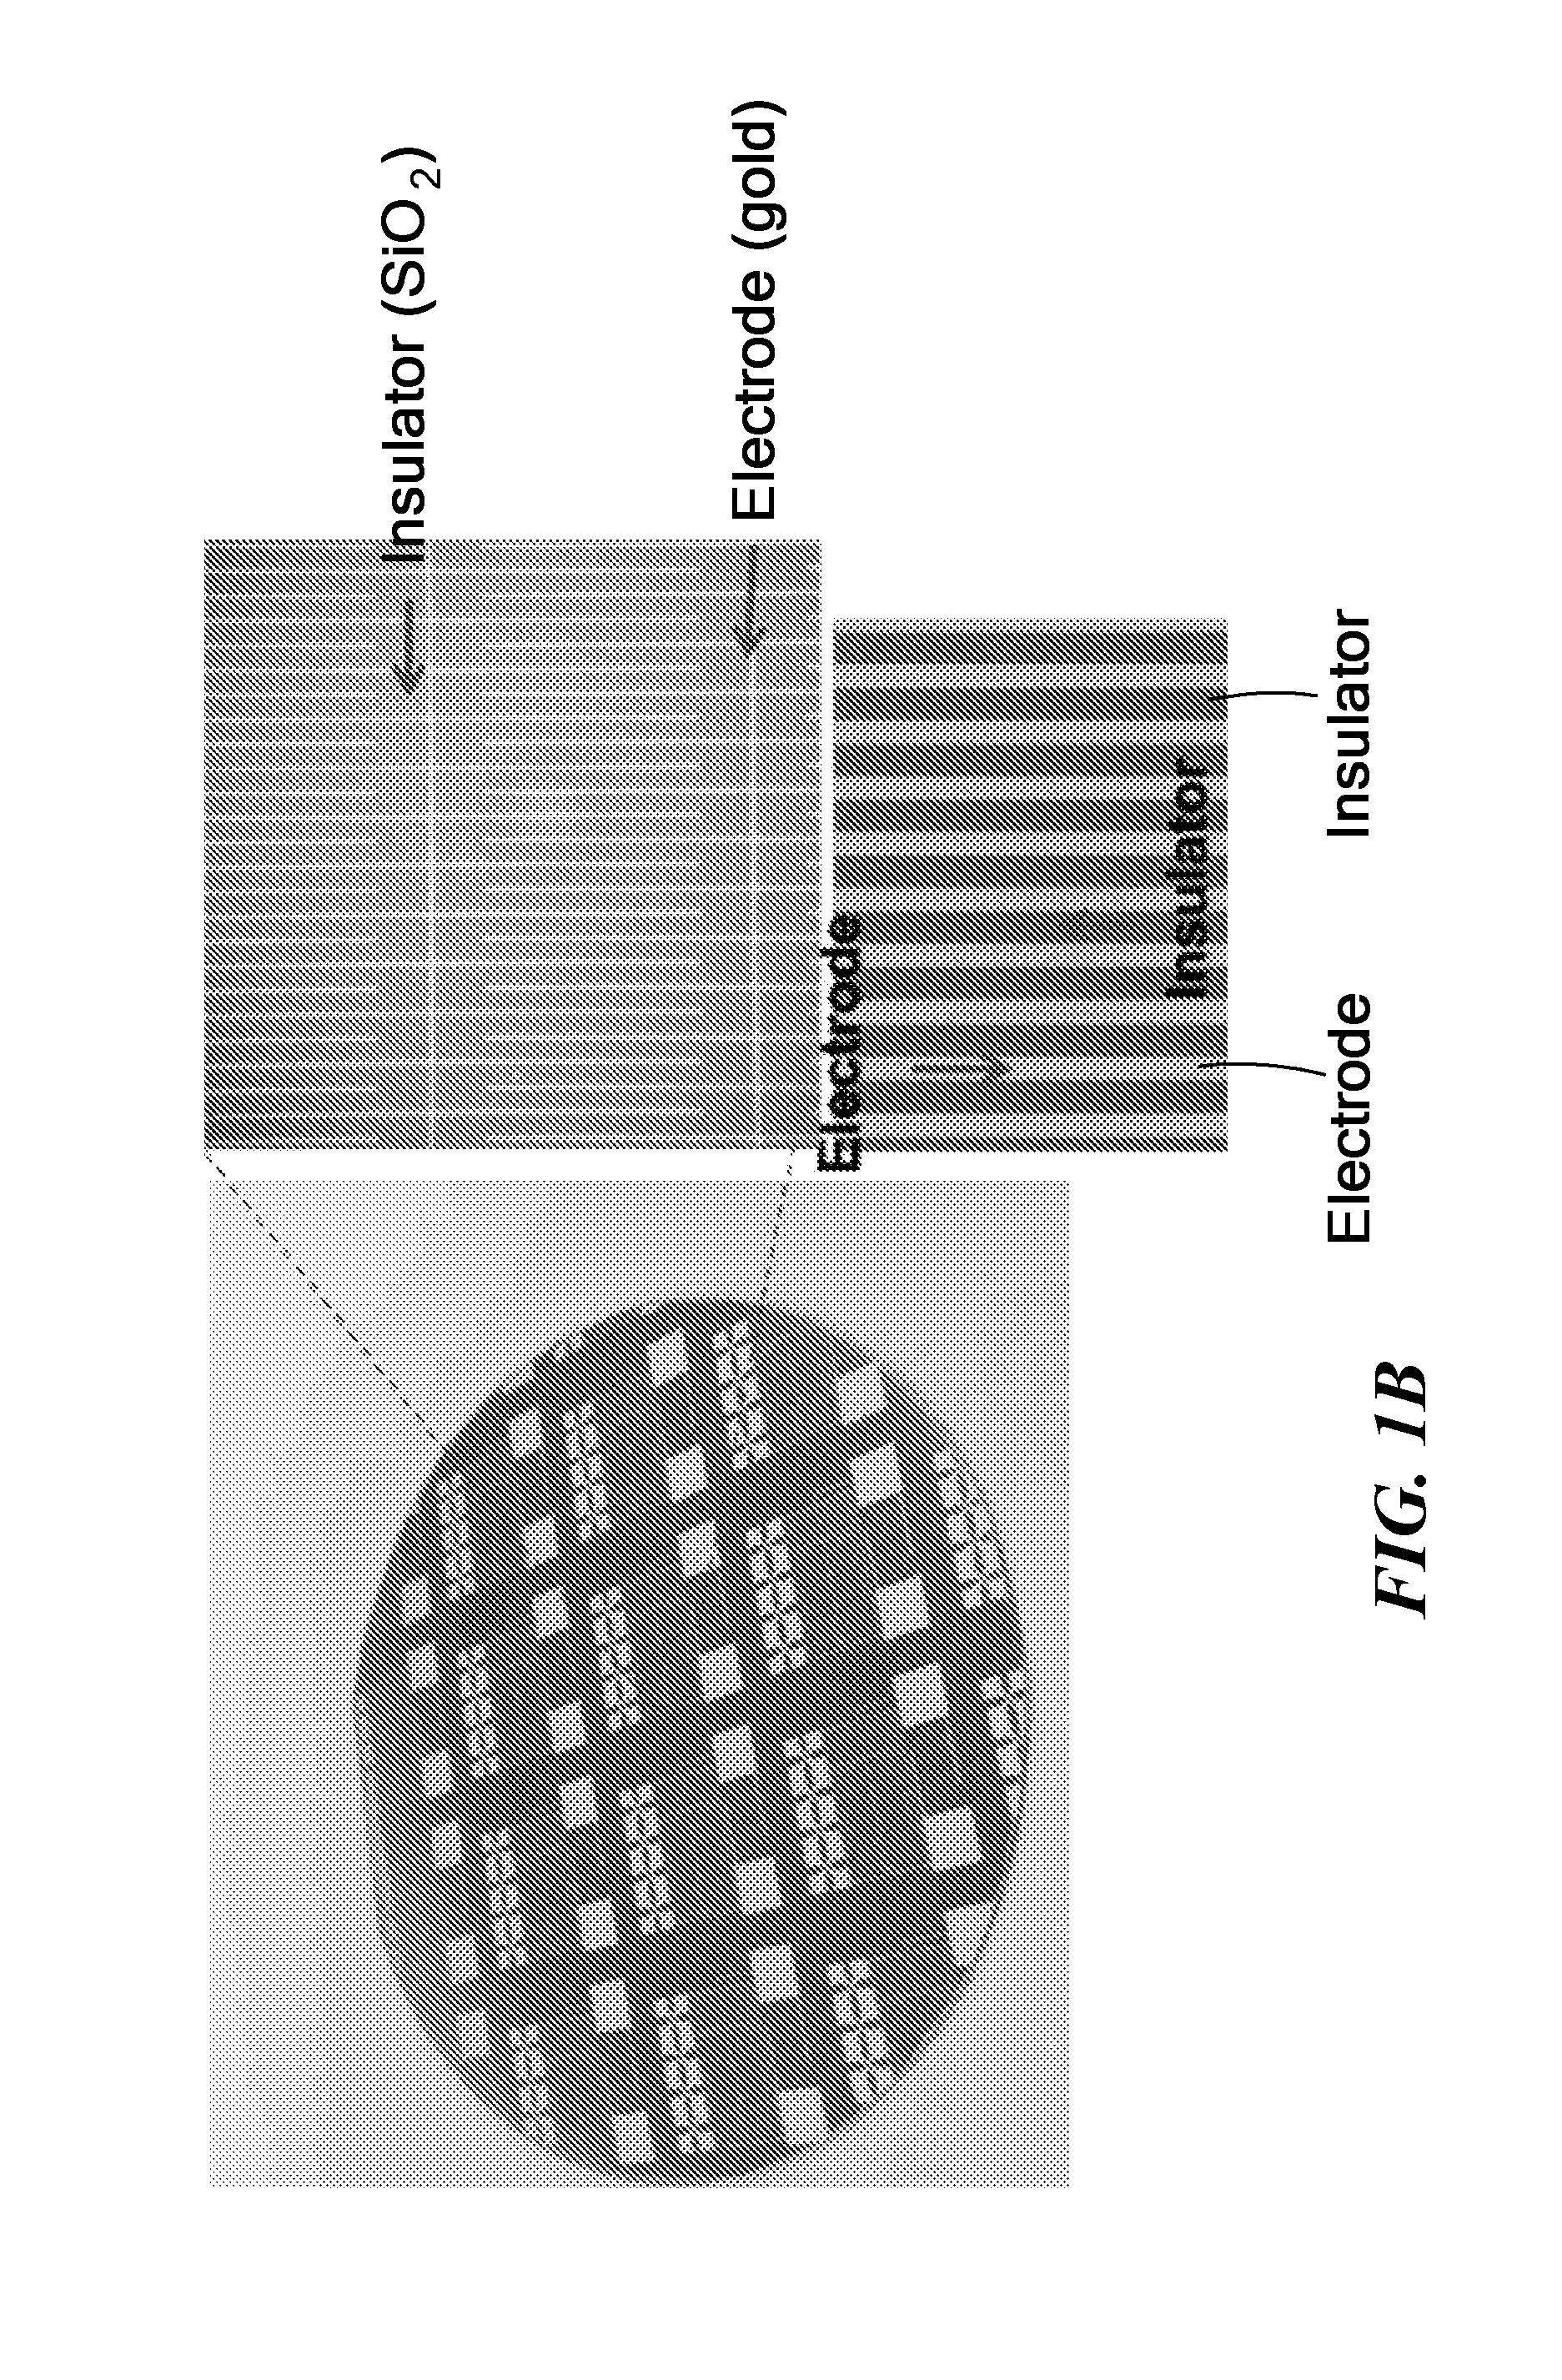 Damascene Template for Directed Assembly and Transfer of Nanoelements